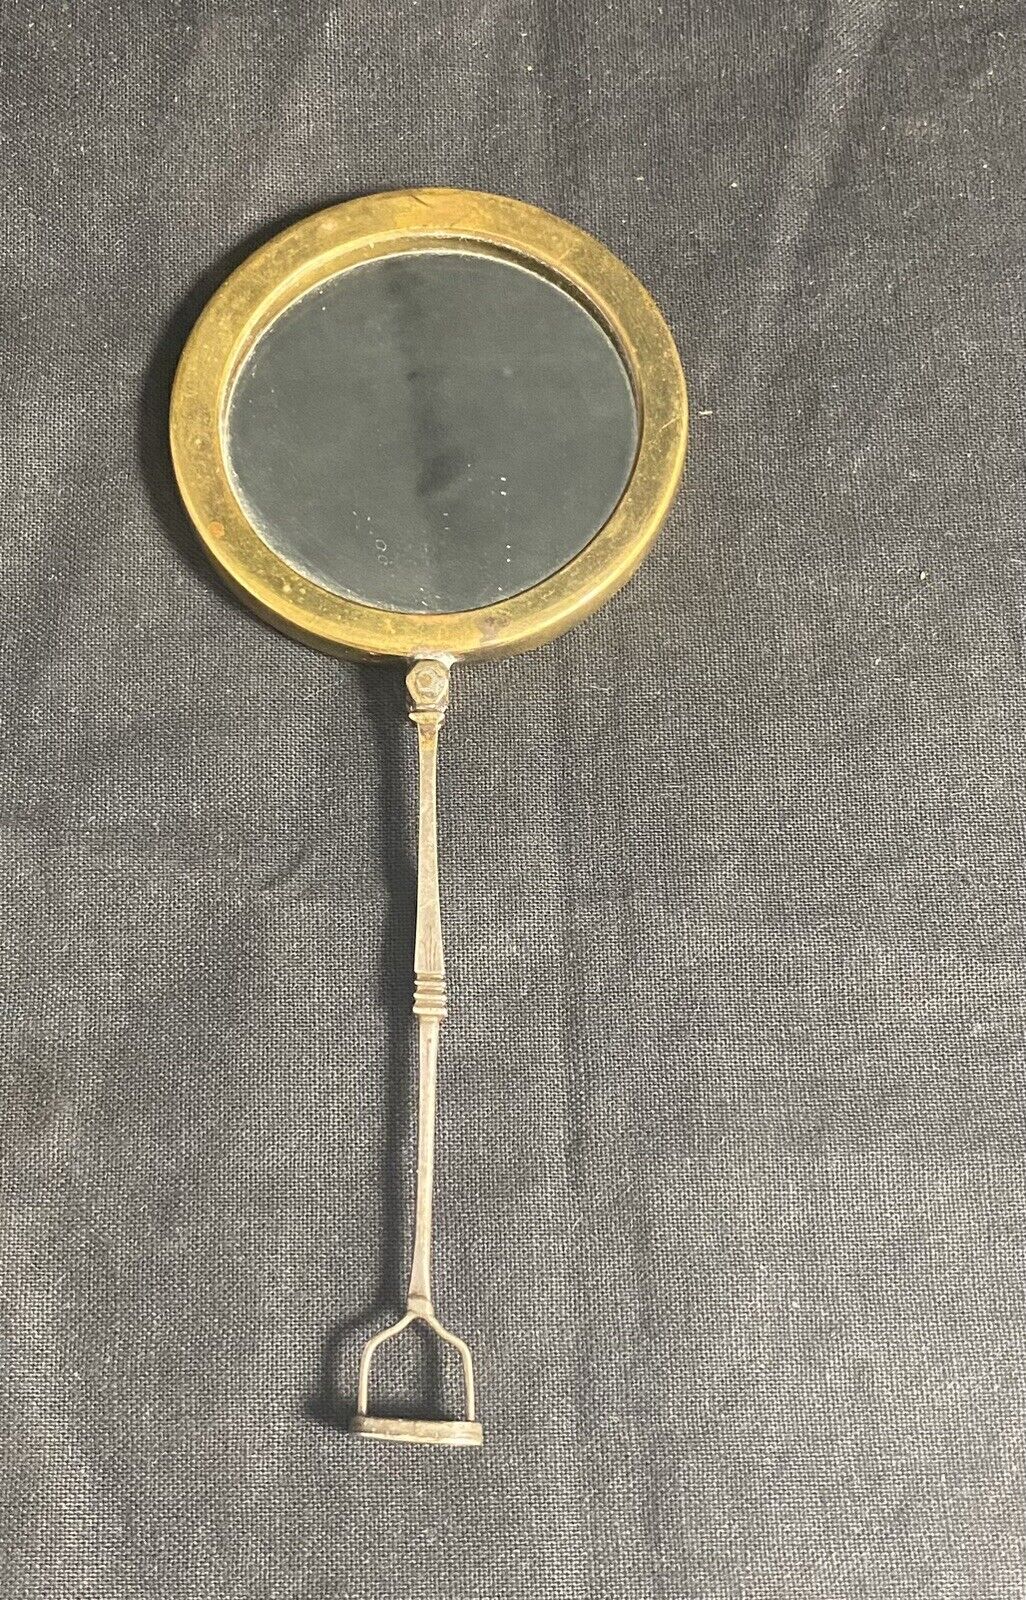 Antique 18th / 19th C. Hand Held Or Automotive Car Mirror Engraved Back Brass